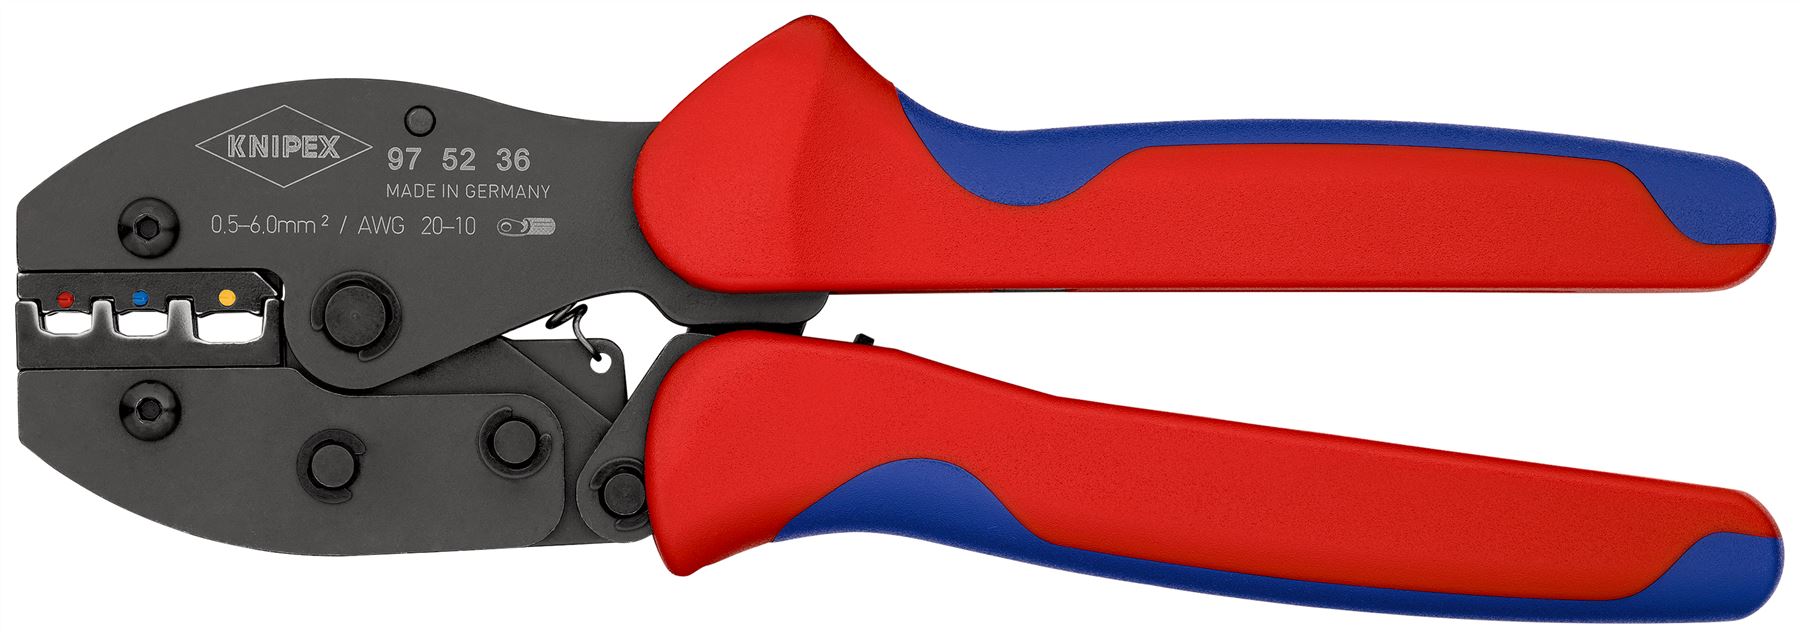 KNIPEX PreciForce Crimping Pliers for Insulated Connectors 0.5-6.0mm² 220mm 97 52 36 SB